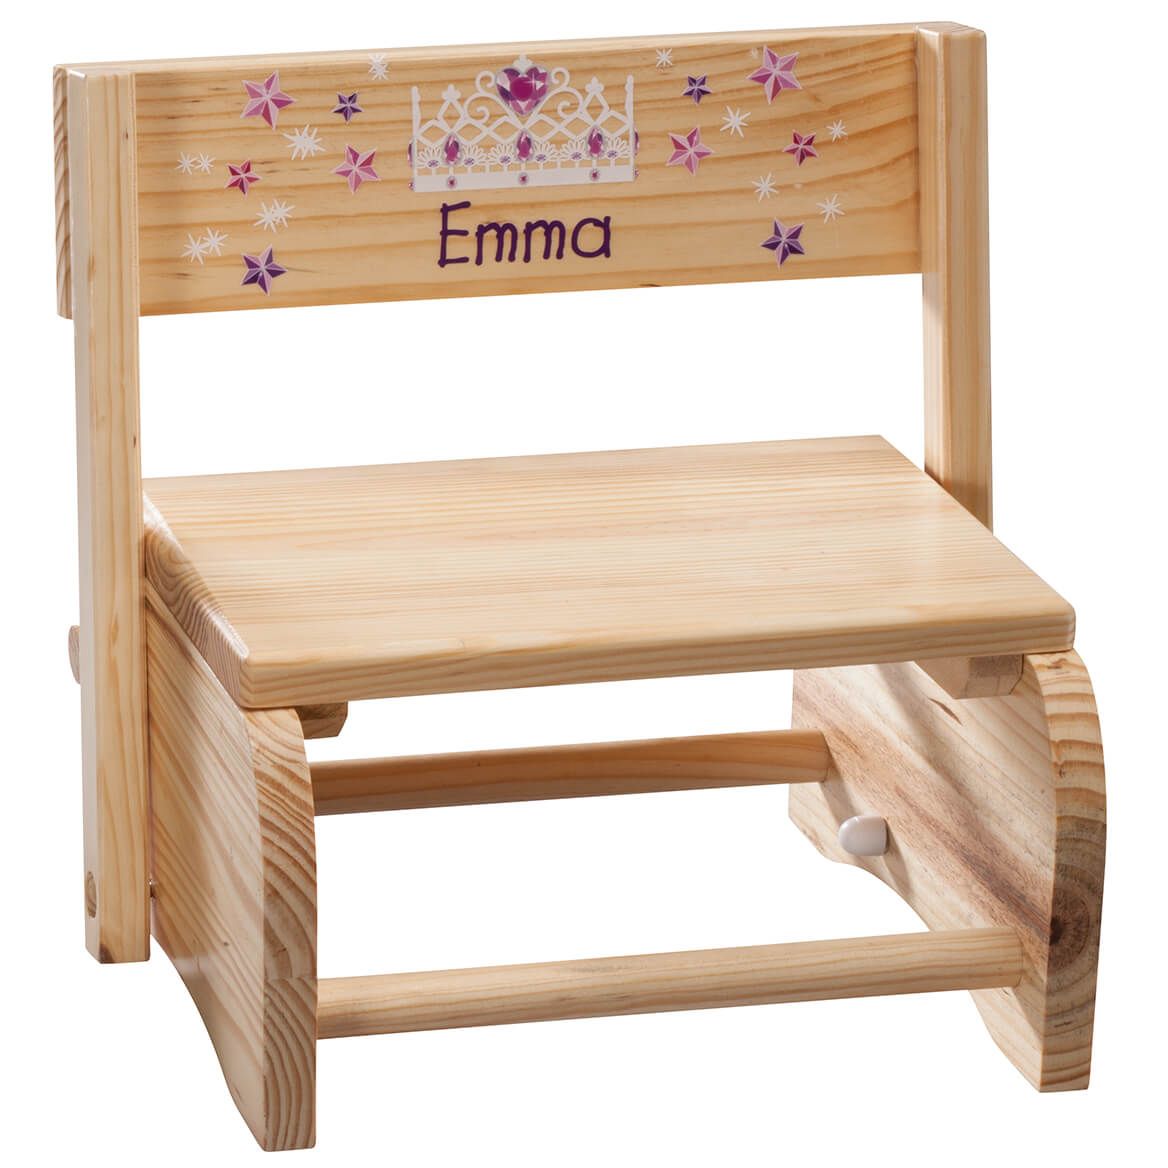 Personalized Children's Princess Step Stool + '-' + 365660